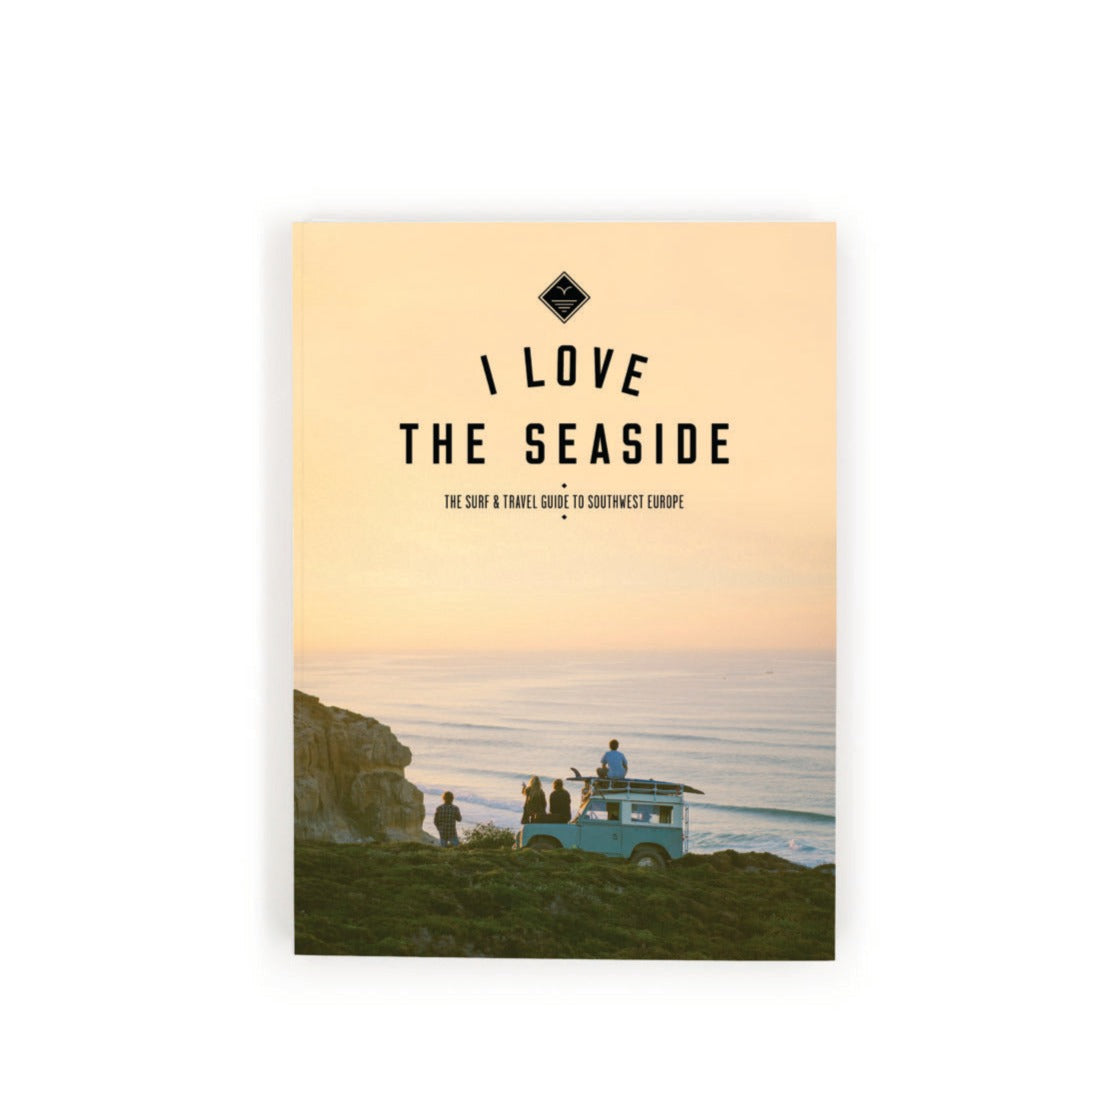 i-love-the-seaside-travel-surf-guide-book-south-west-europe-galway-ireland-blacksheepsurfco-cover